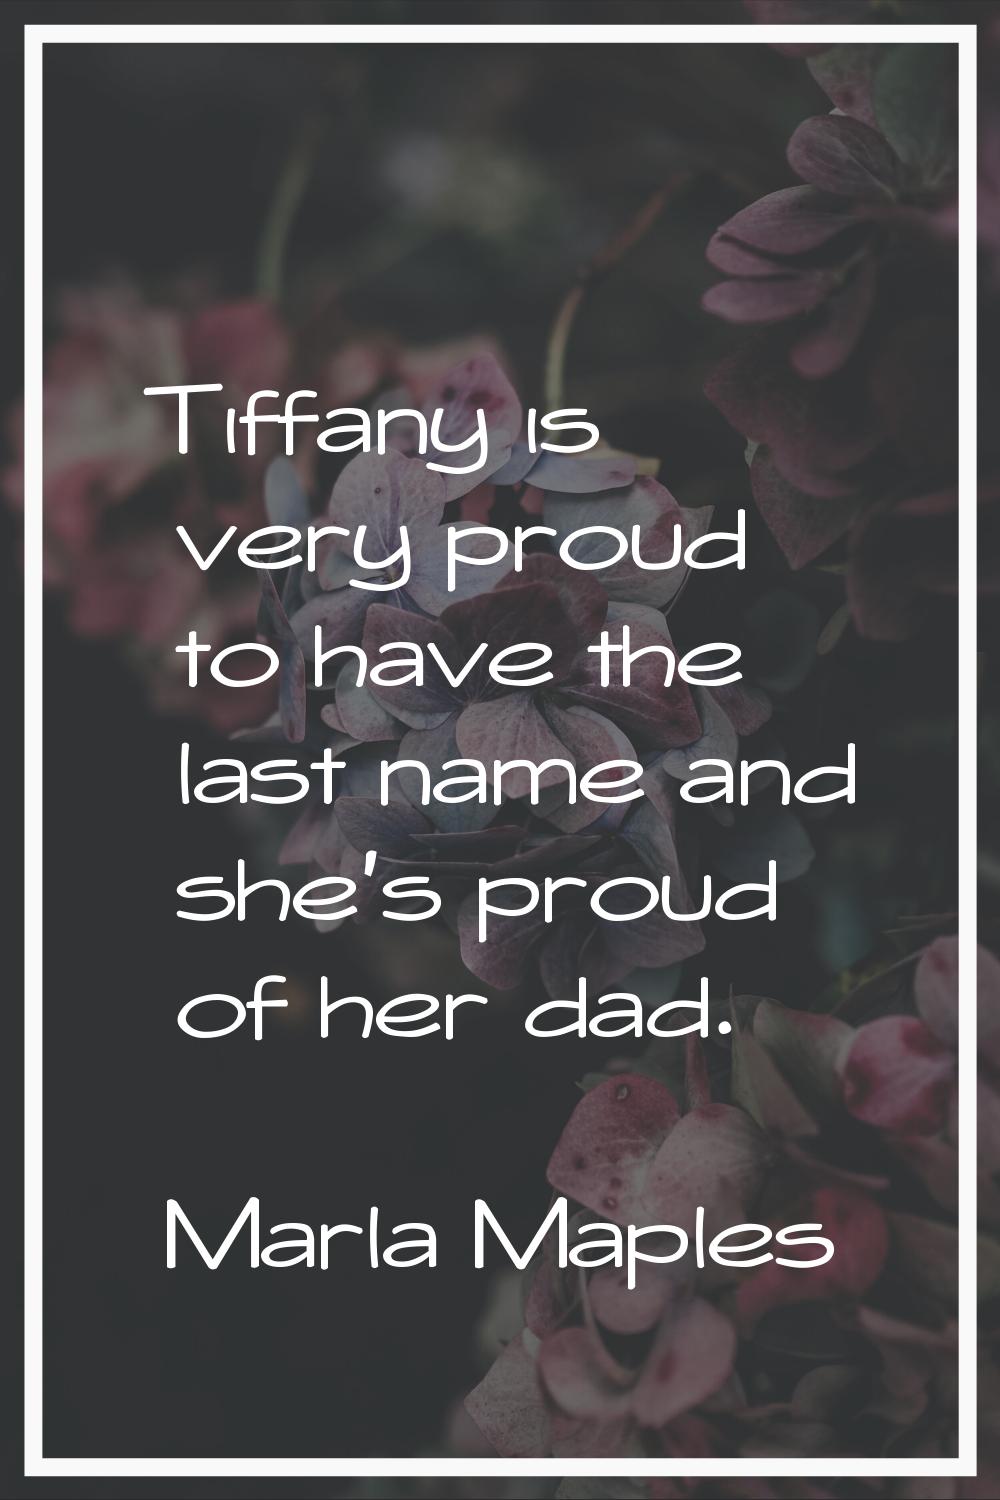 Tiffany is very proud to have the last name and she's proud of her dad.